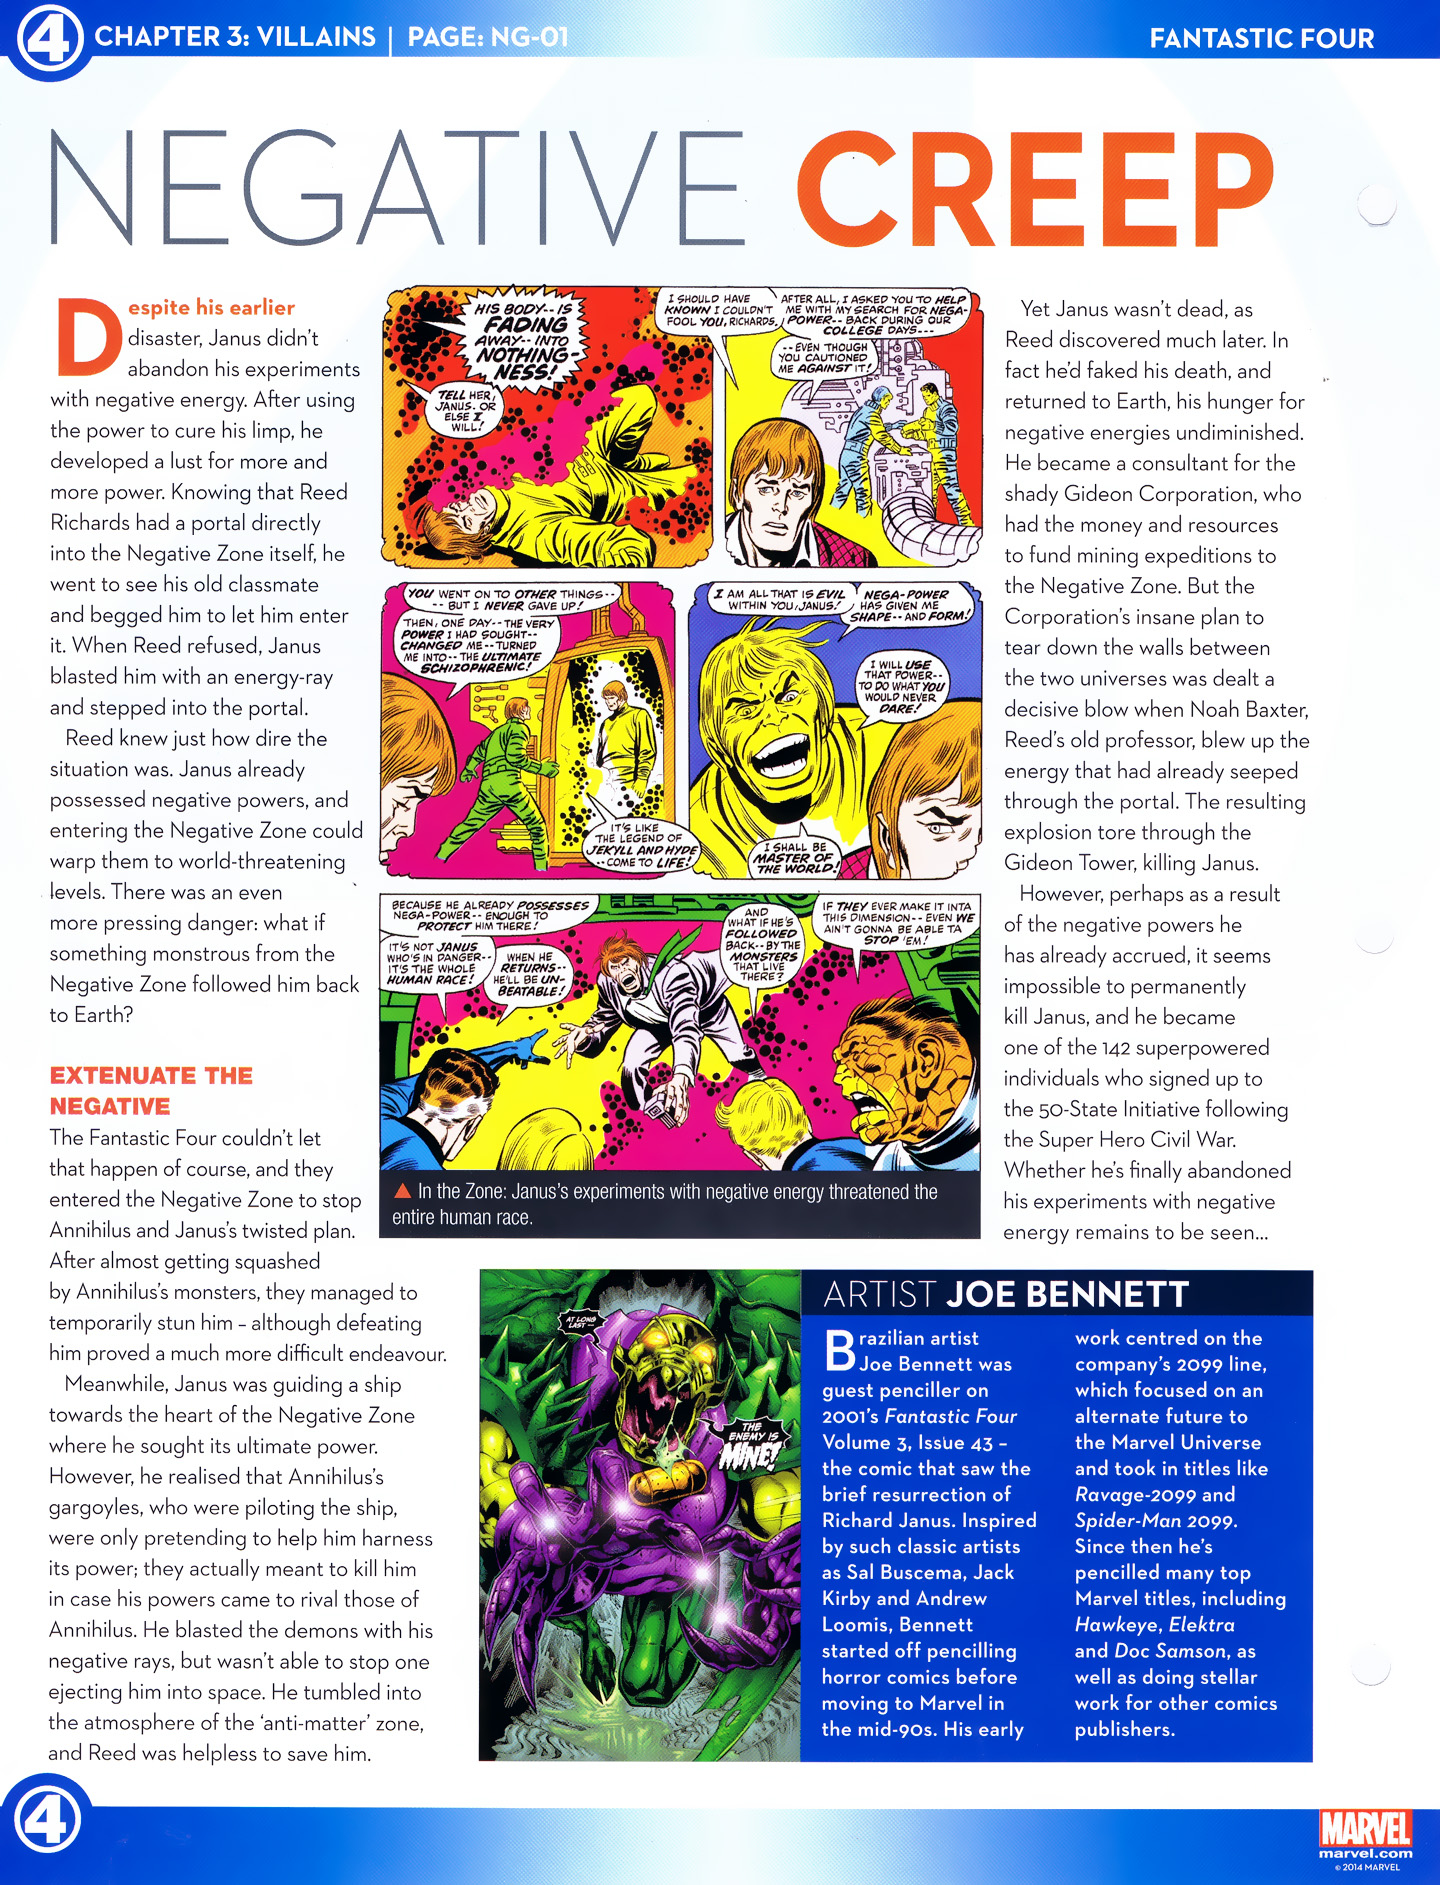 Read online Marvel Fact Files comic -  Issue #54 - 16